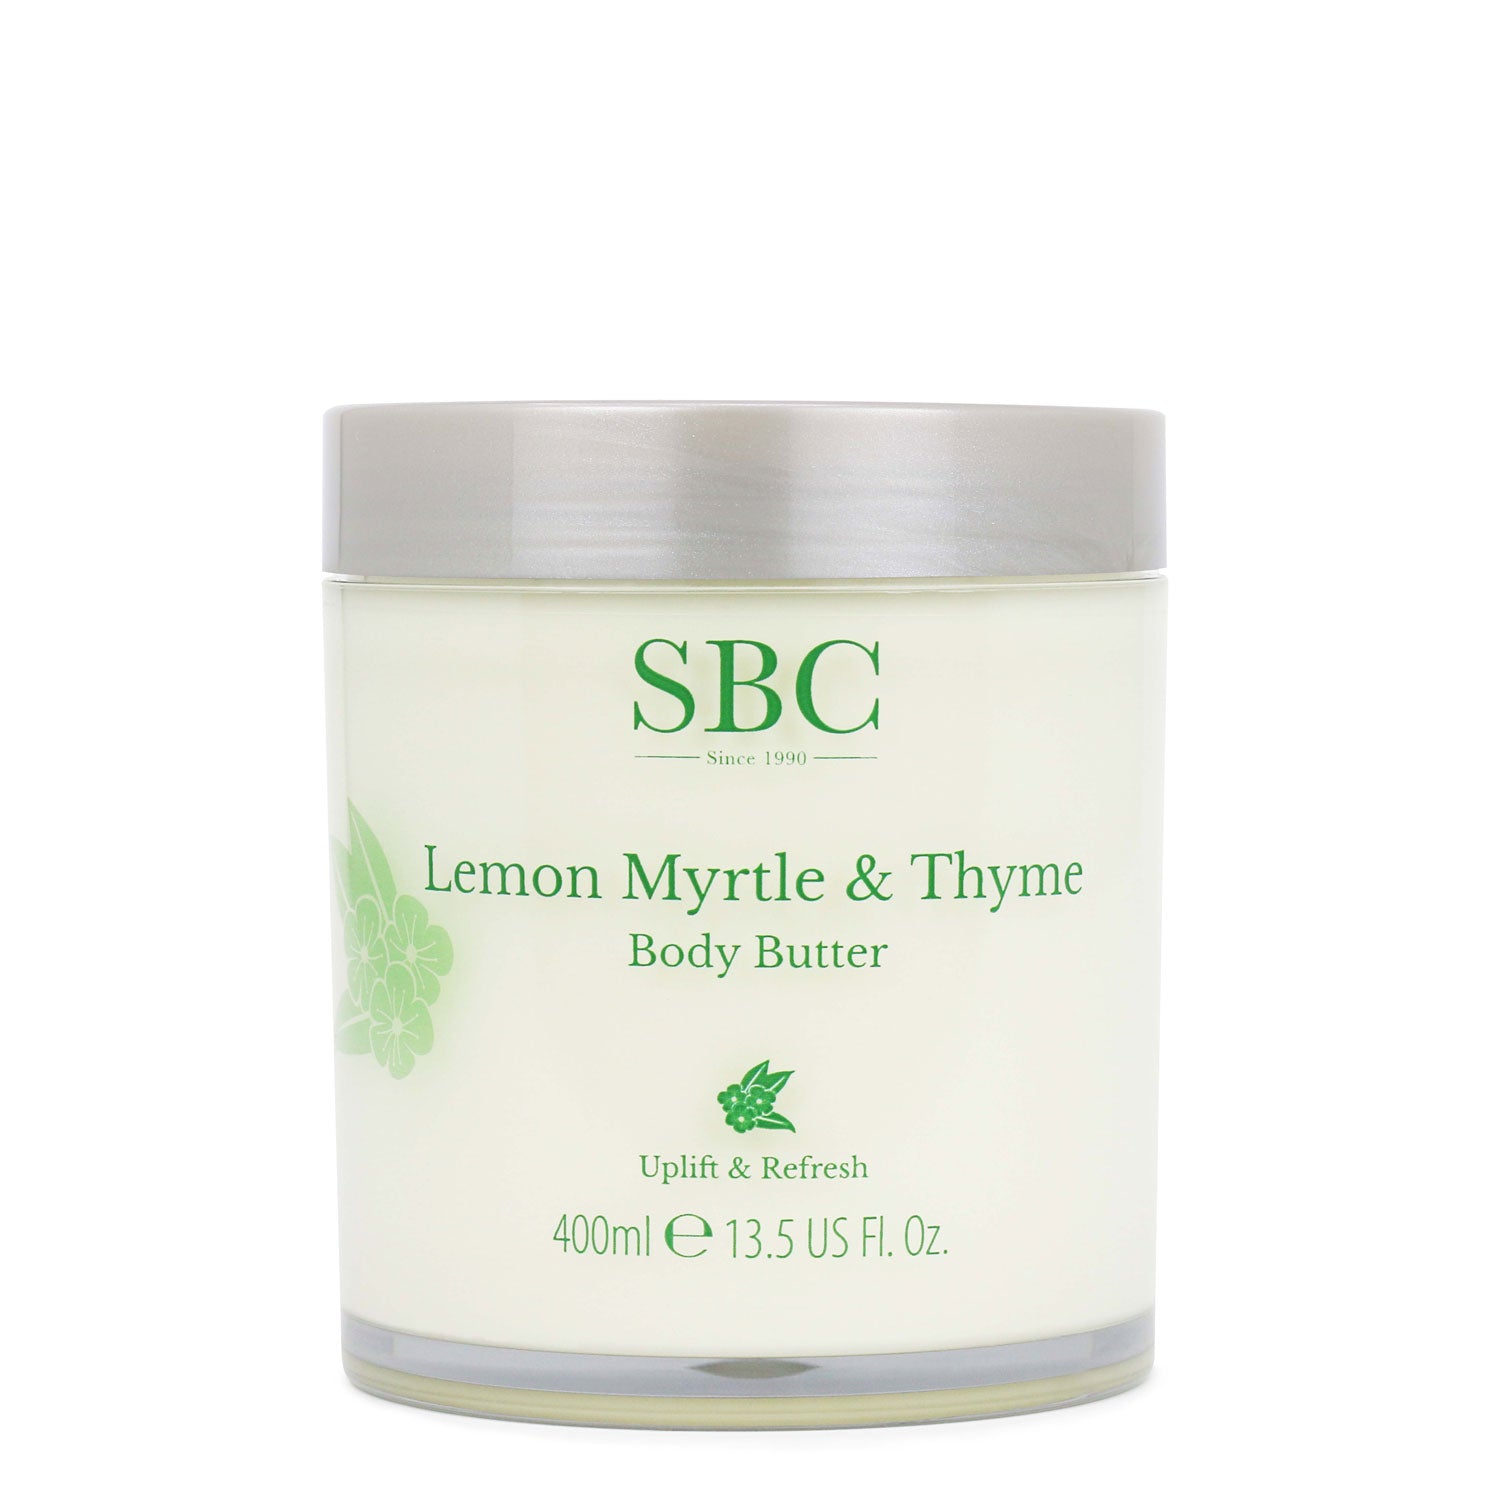 Lemon Myrtle & Thyme Body Butter 400ml on a white background